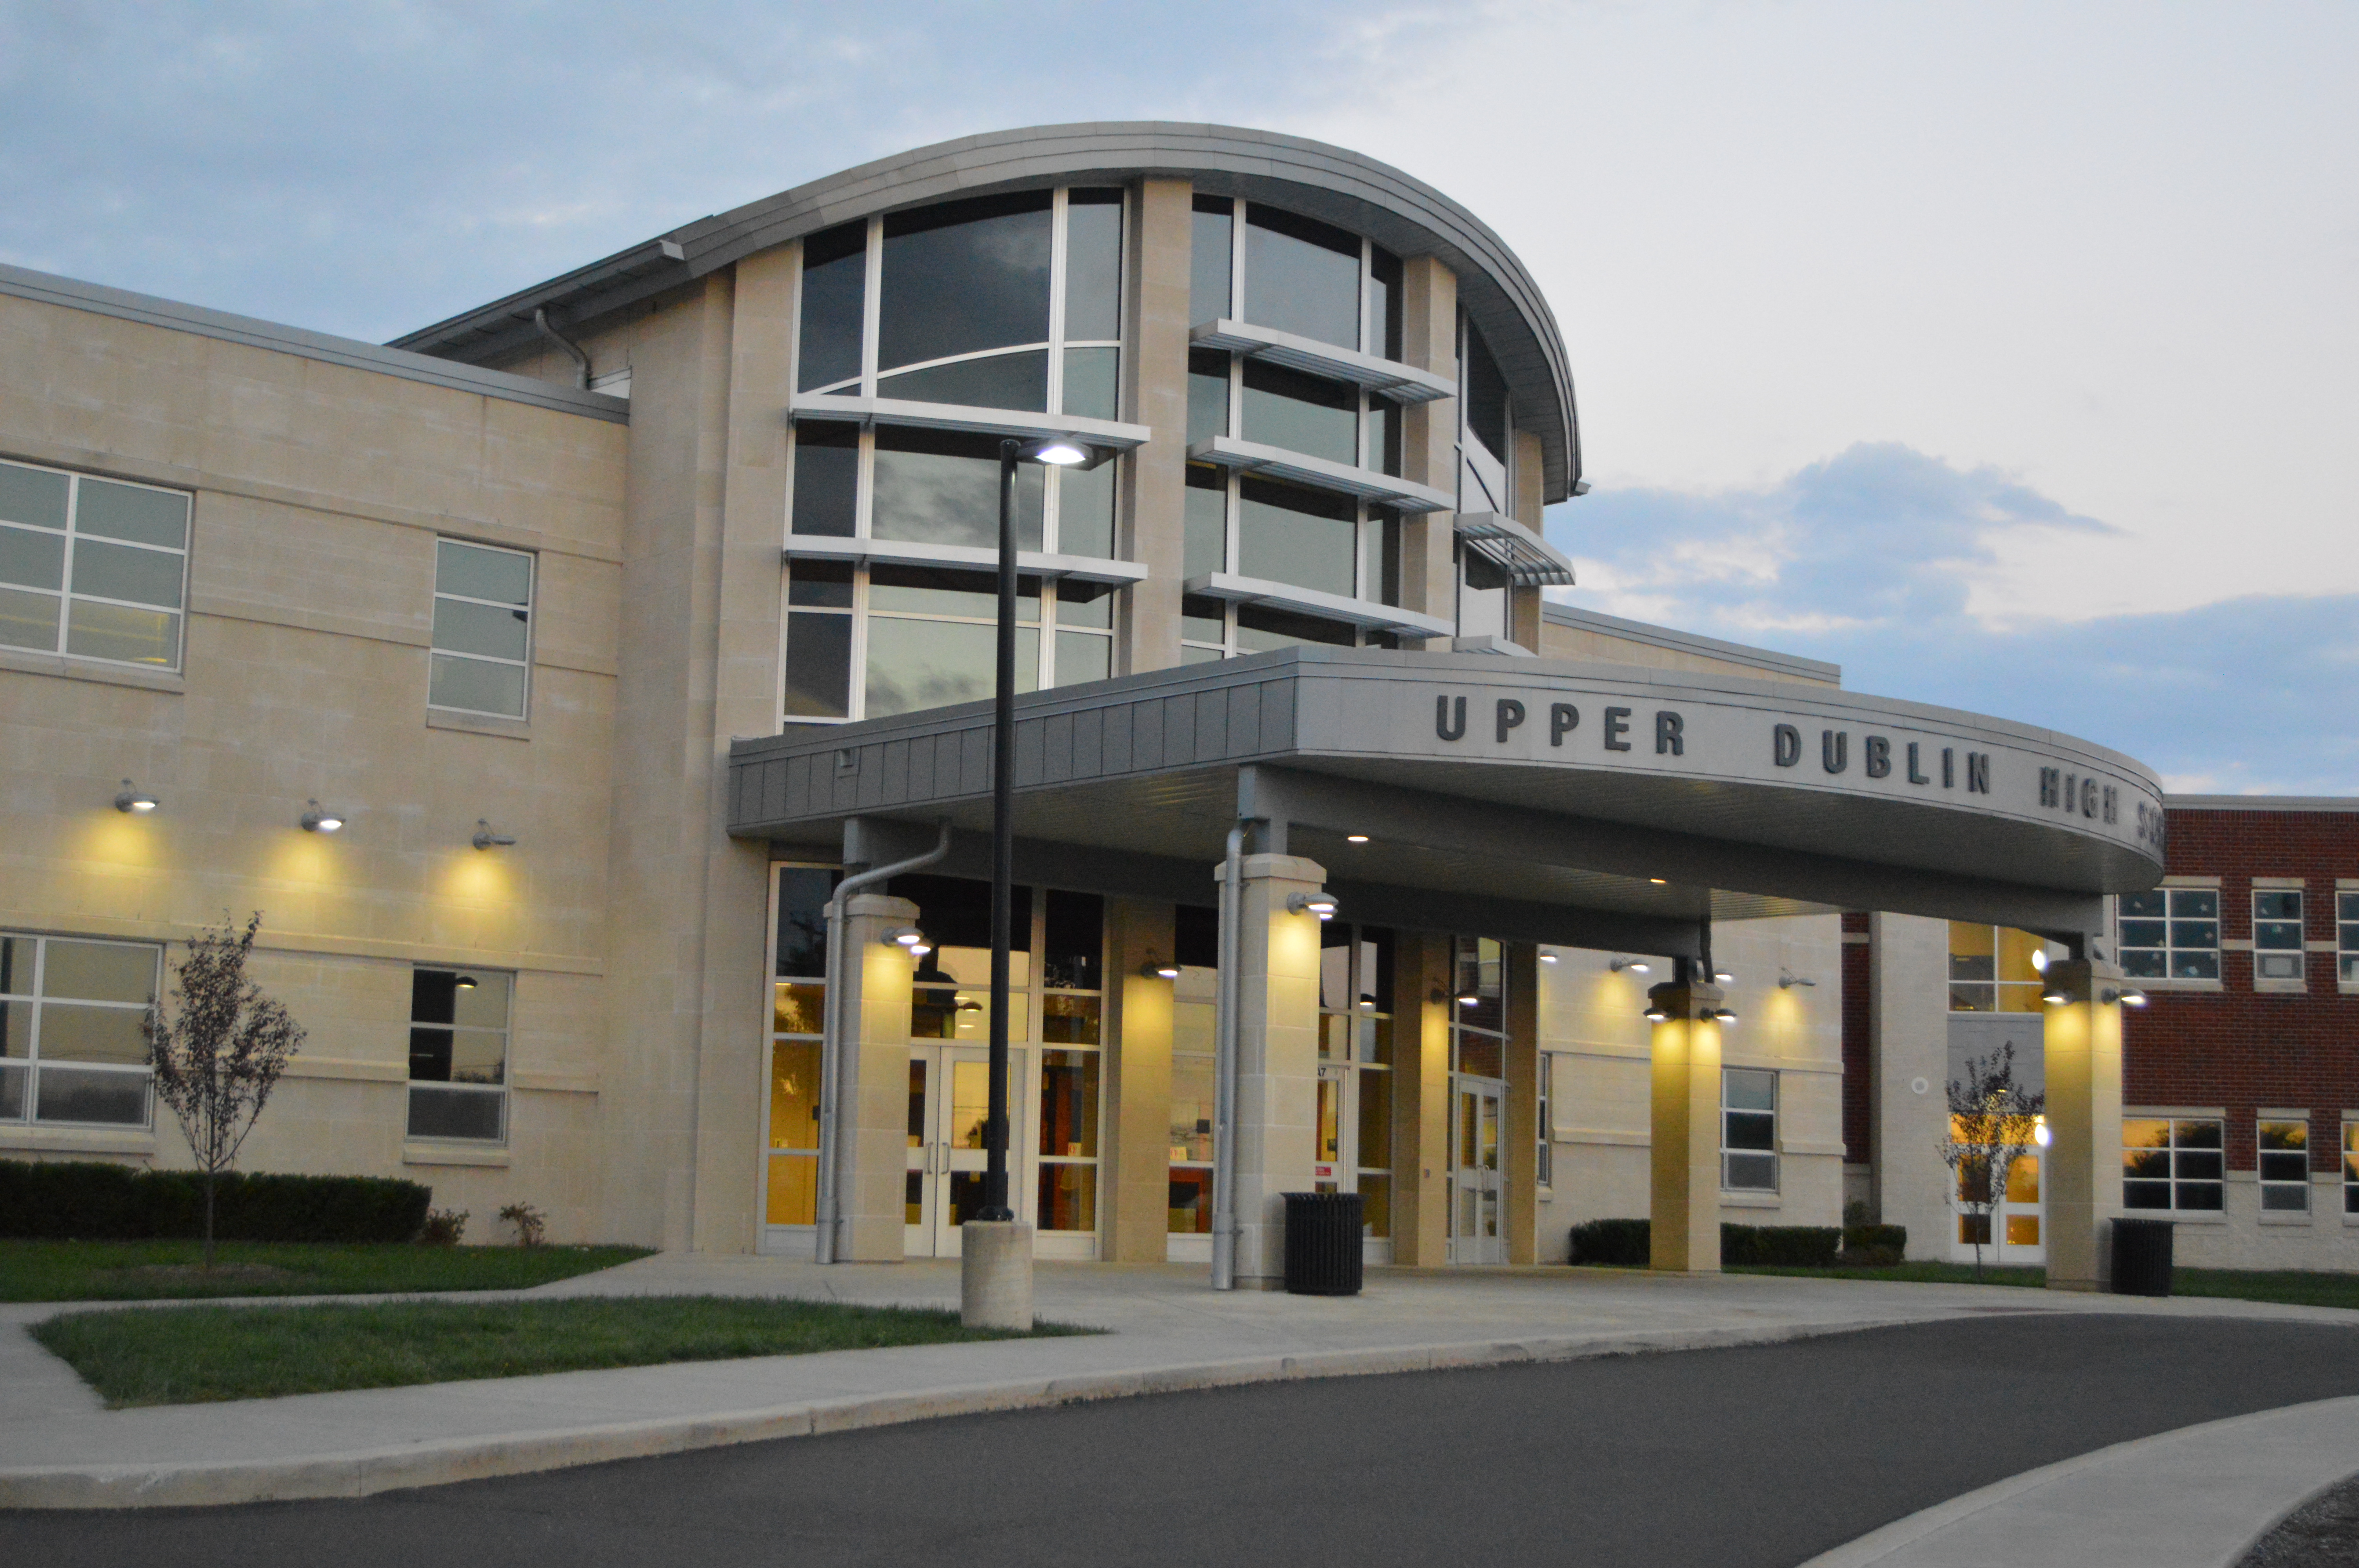 Upper Dublin PA High School- Photo by Montgomery Cty Planning (CC BY-SA 2.0)